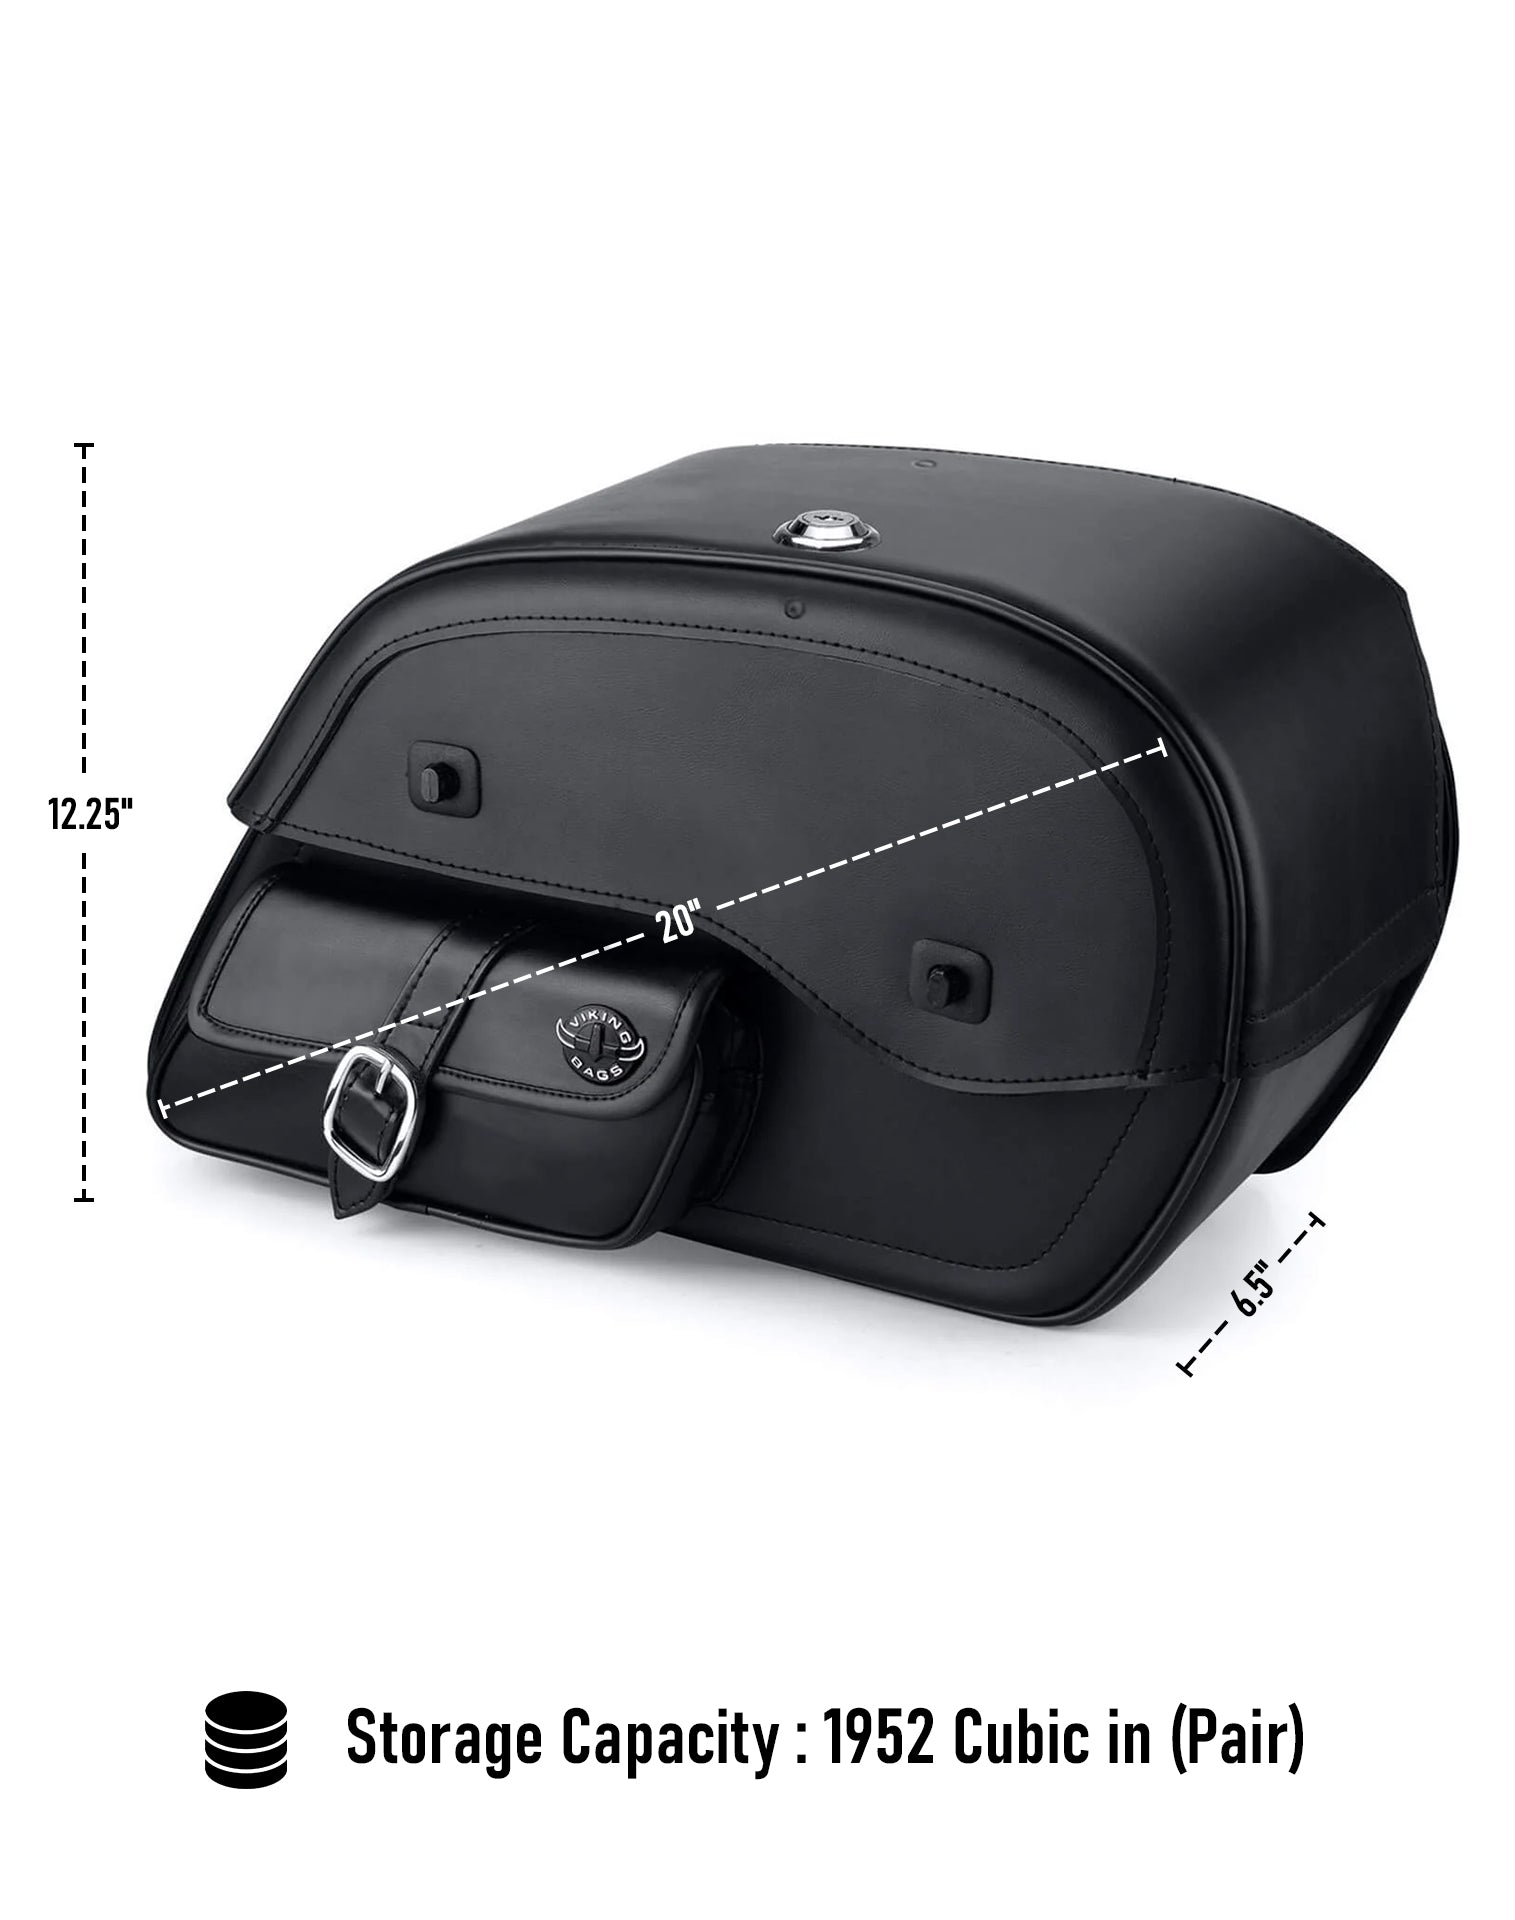 Viking Essential Side Pocket Large Kawasaki Vulcan 900 Classic Vn900 Leather Motorcycle Saddlebags Can Store Your Ridings Gears